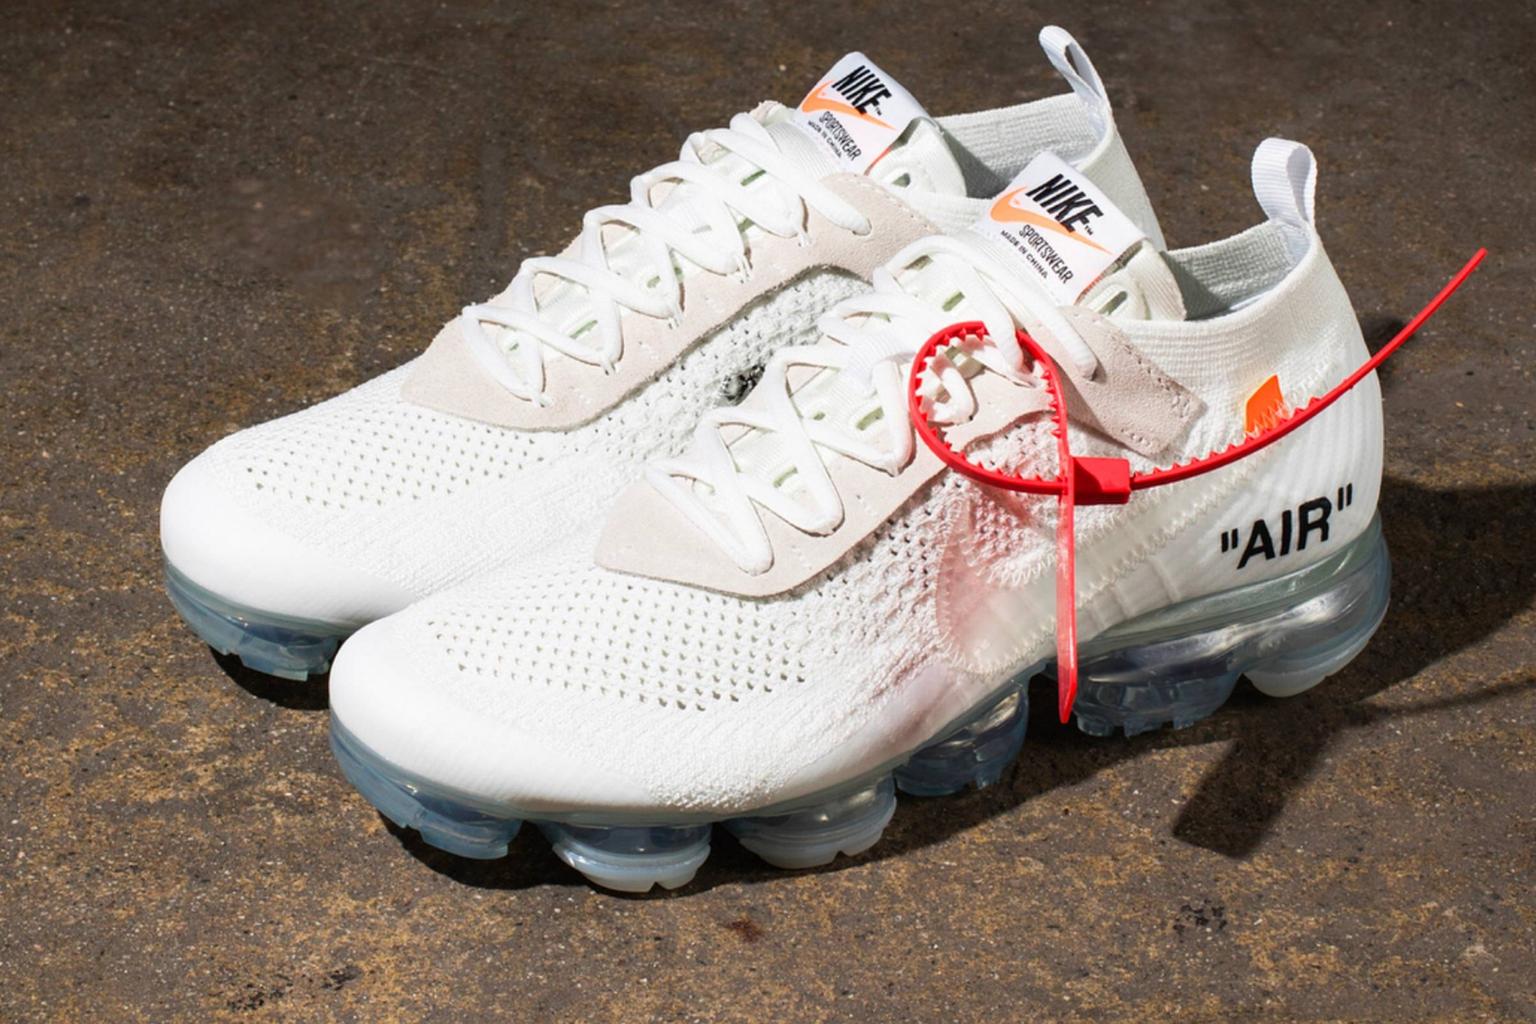 Sneakers The 10 Nike Air Vapormax Fk off white worn by